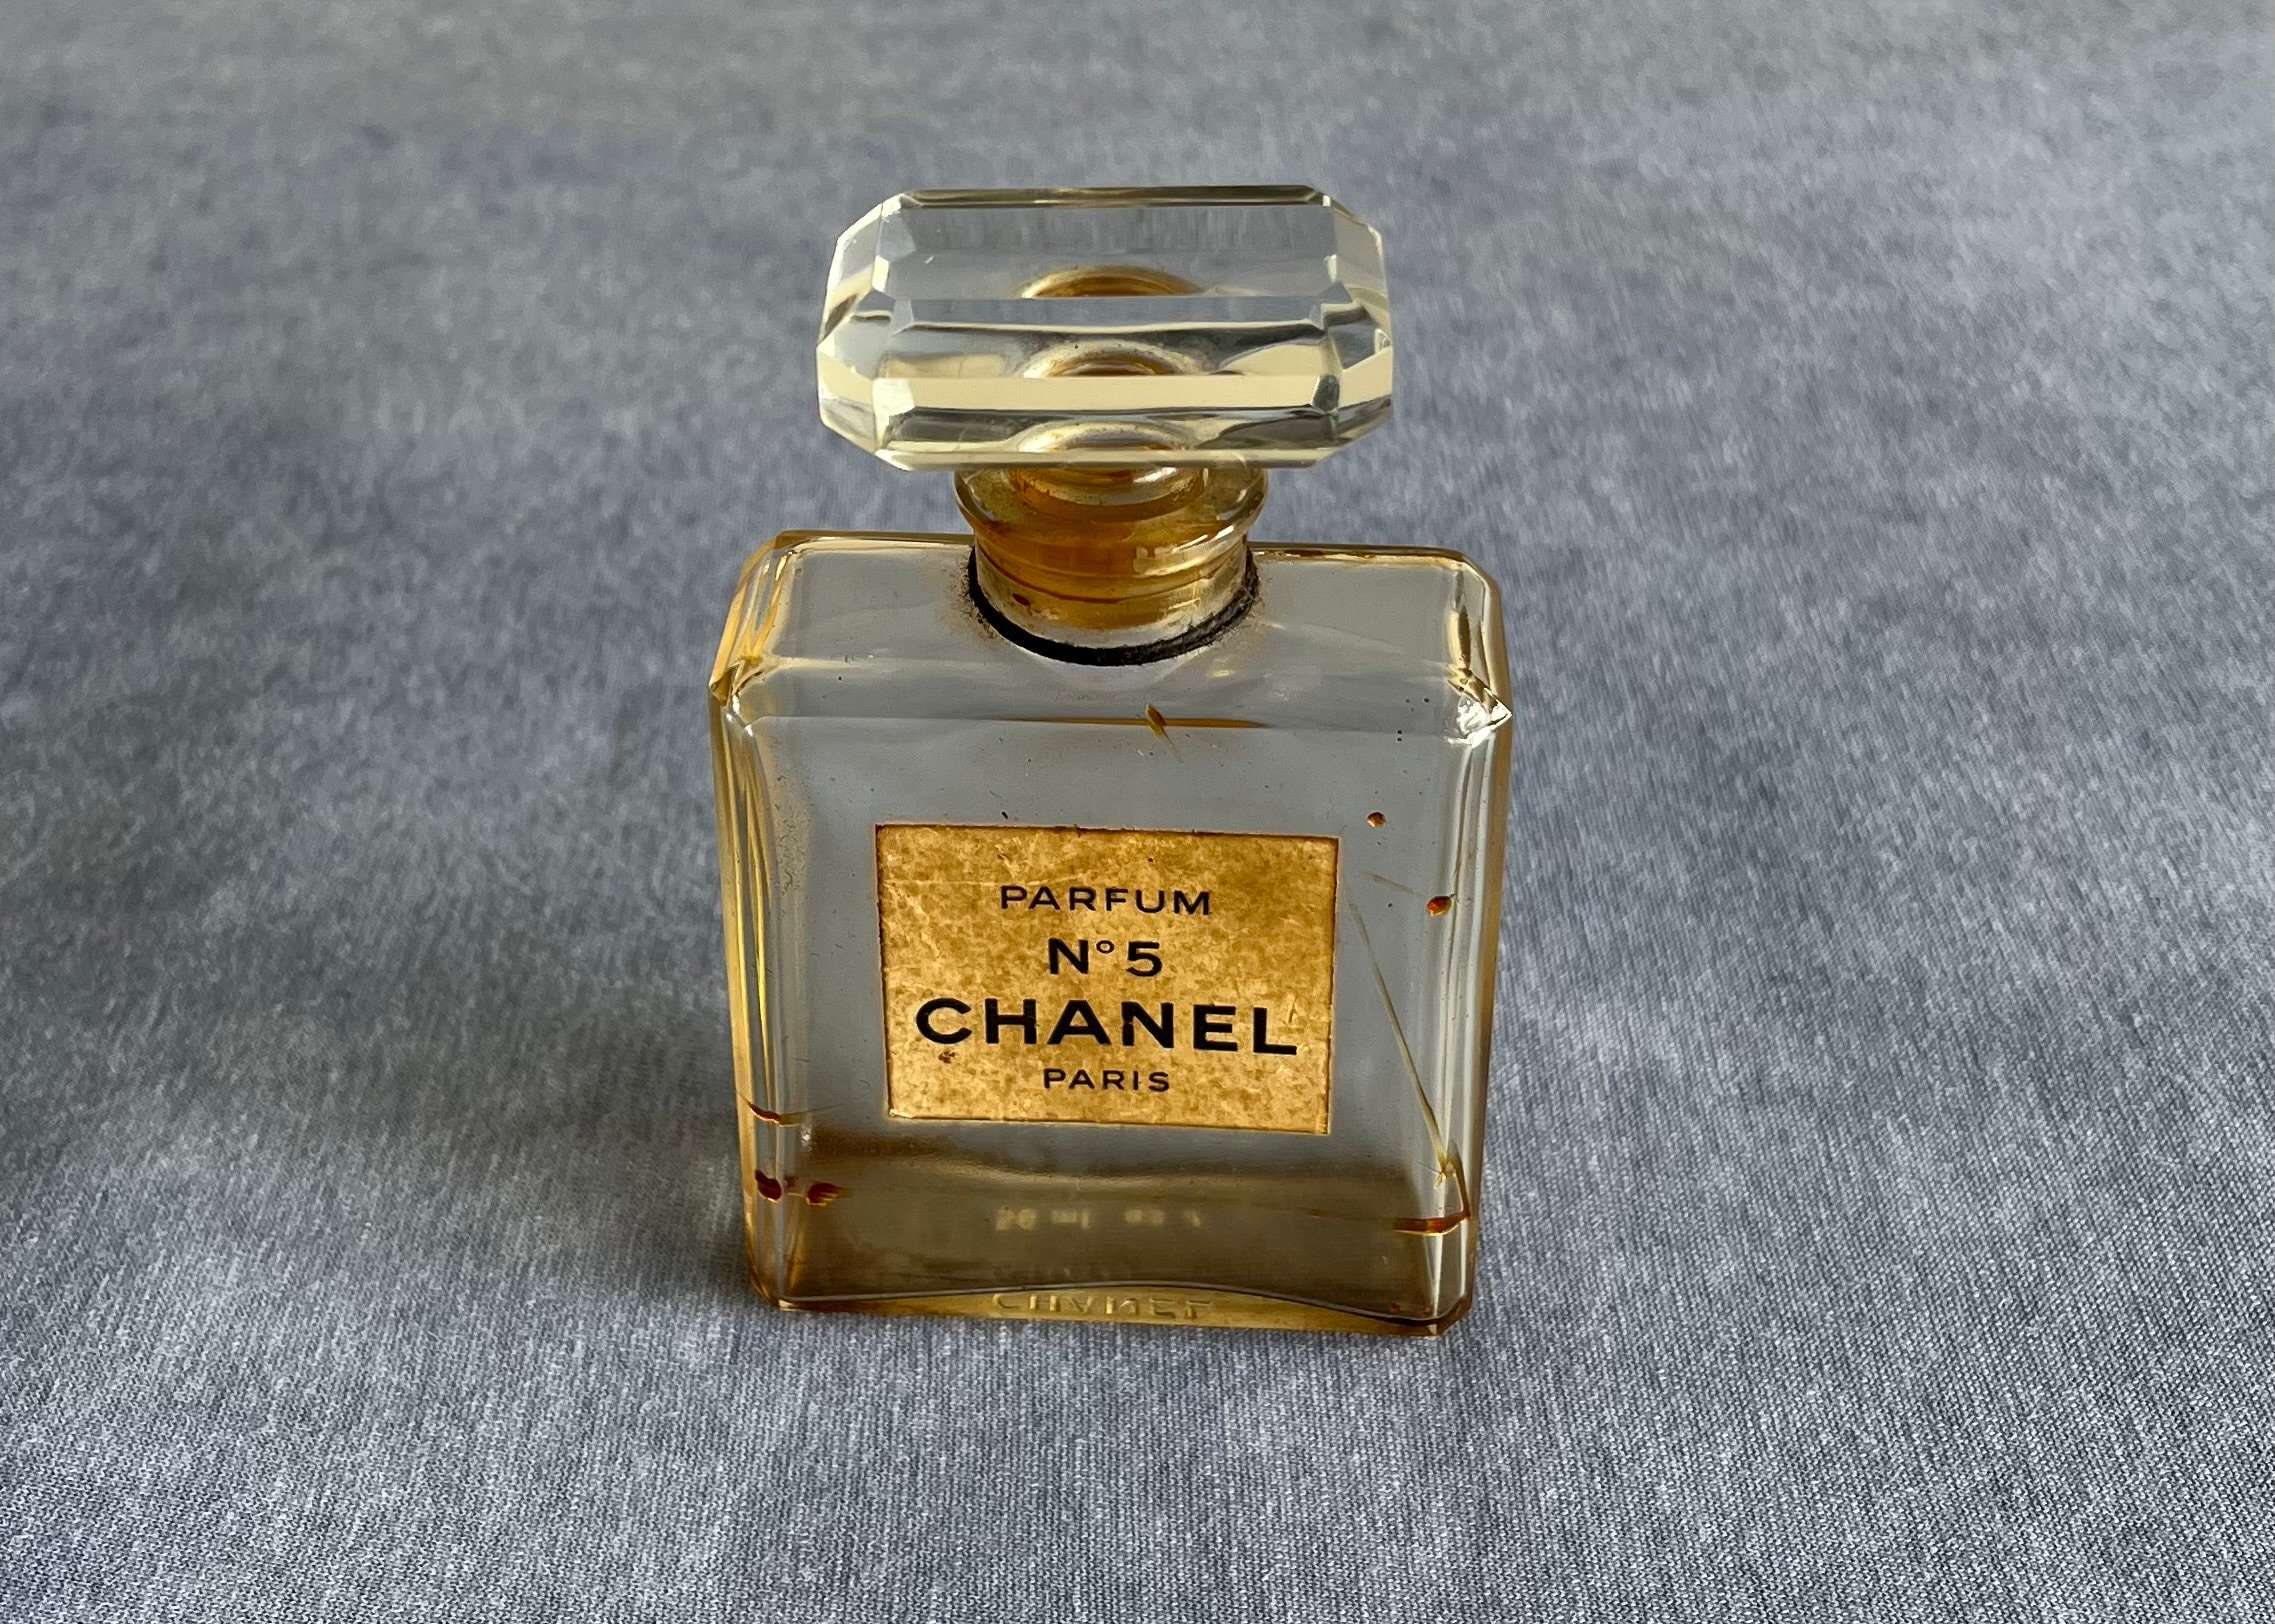 Buy Chanel Perfume Online In India -  India